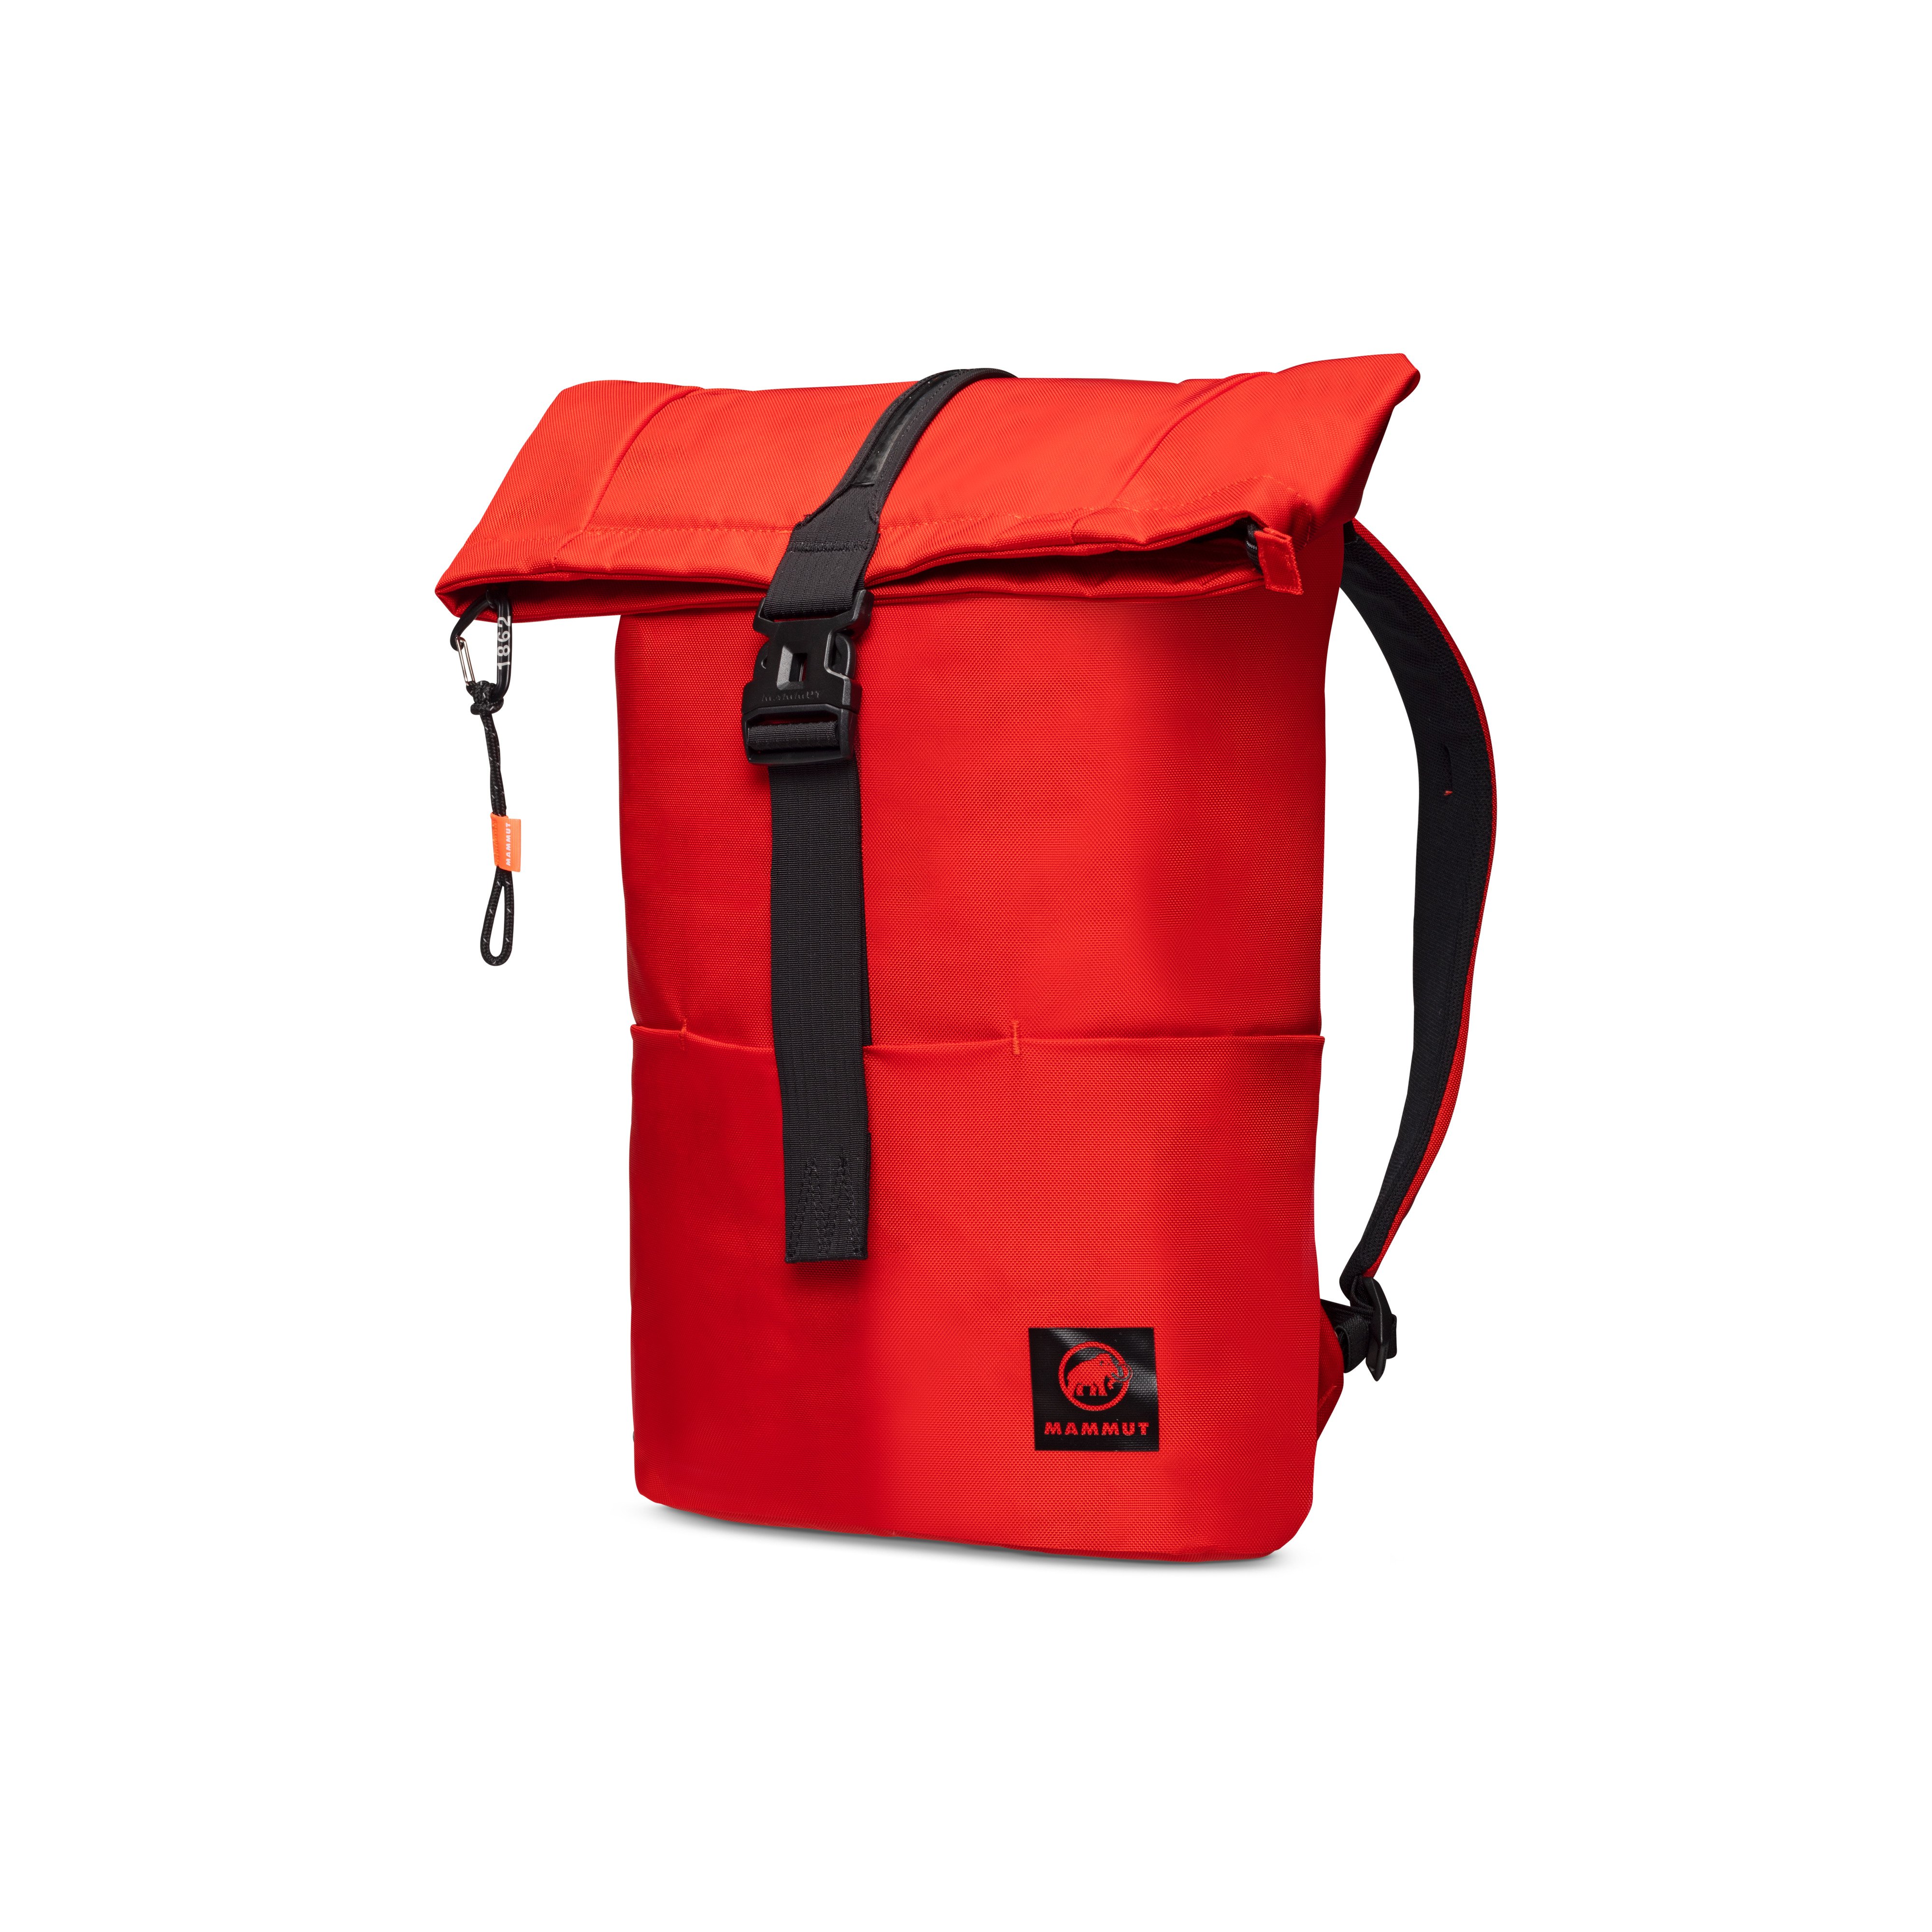 Xeron 15 - spicy, 15 L product image